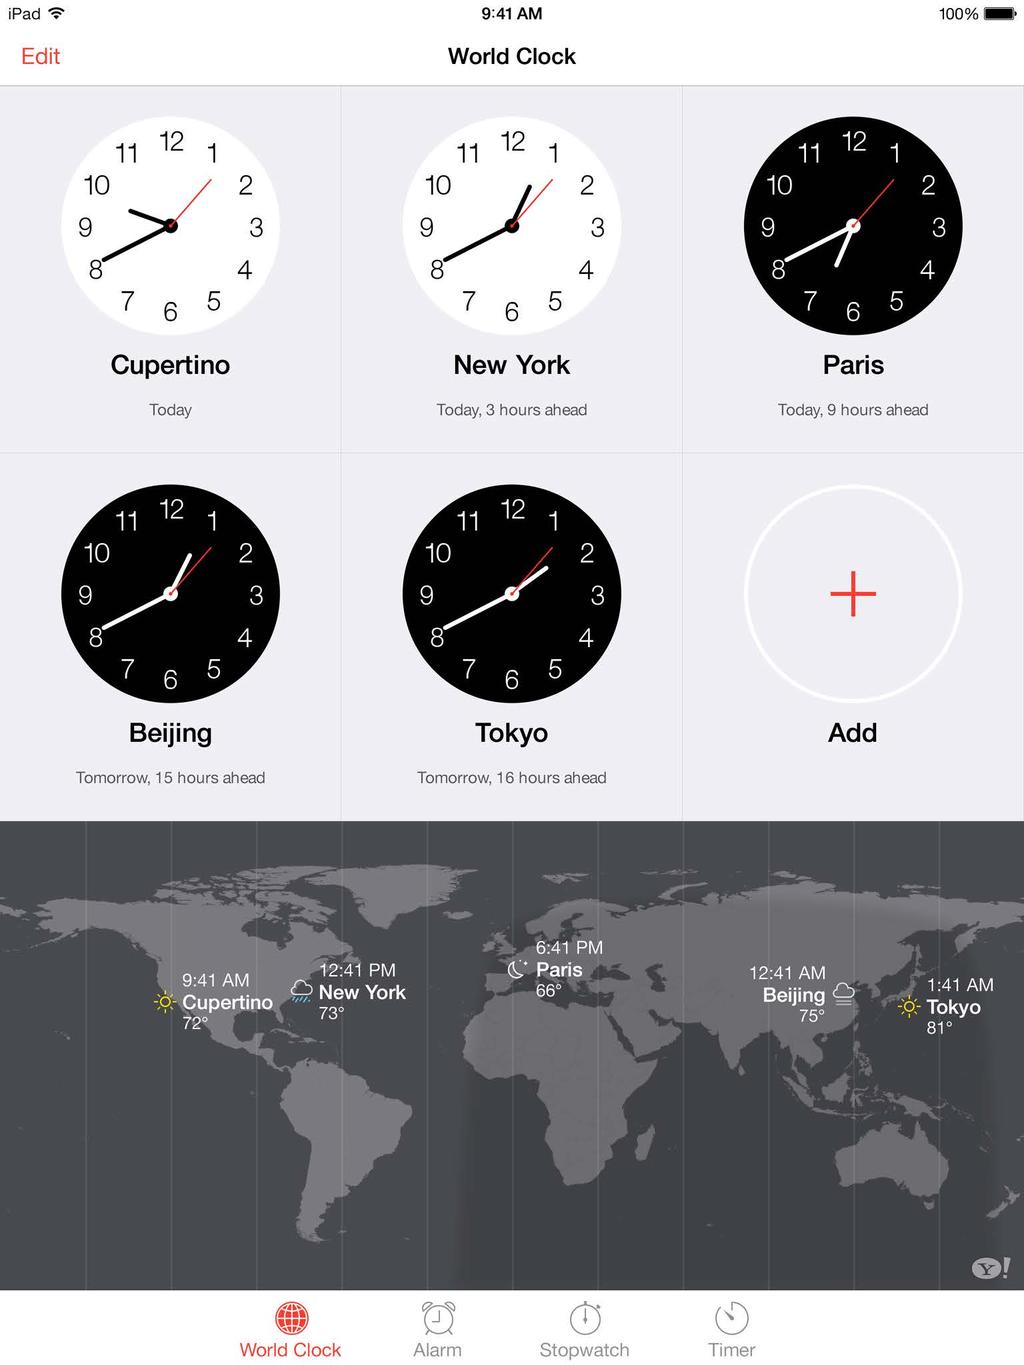 Add other clocks to show the time in other major cities and time zones.